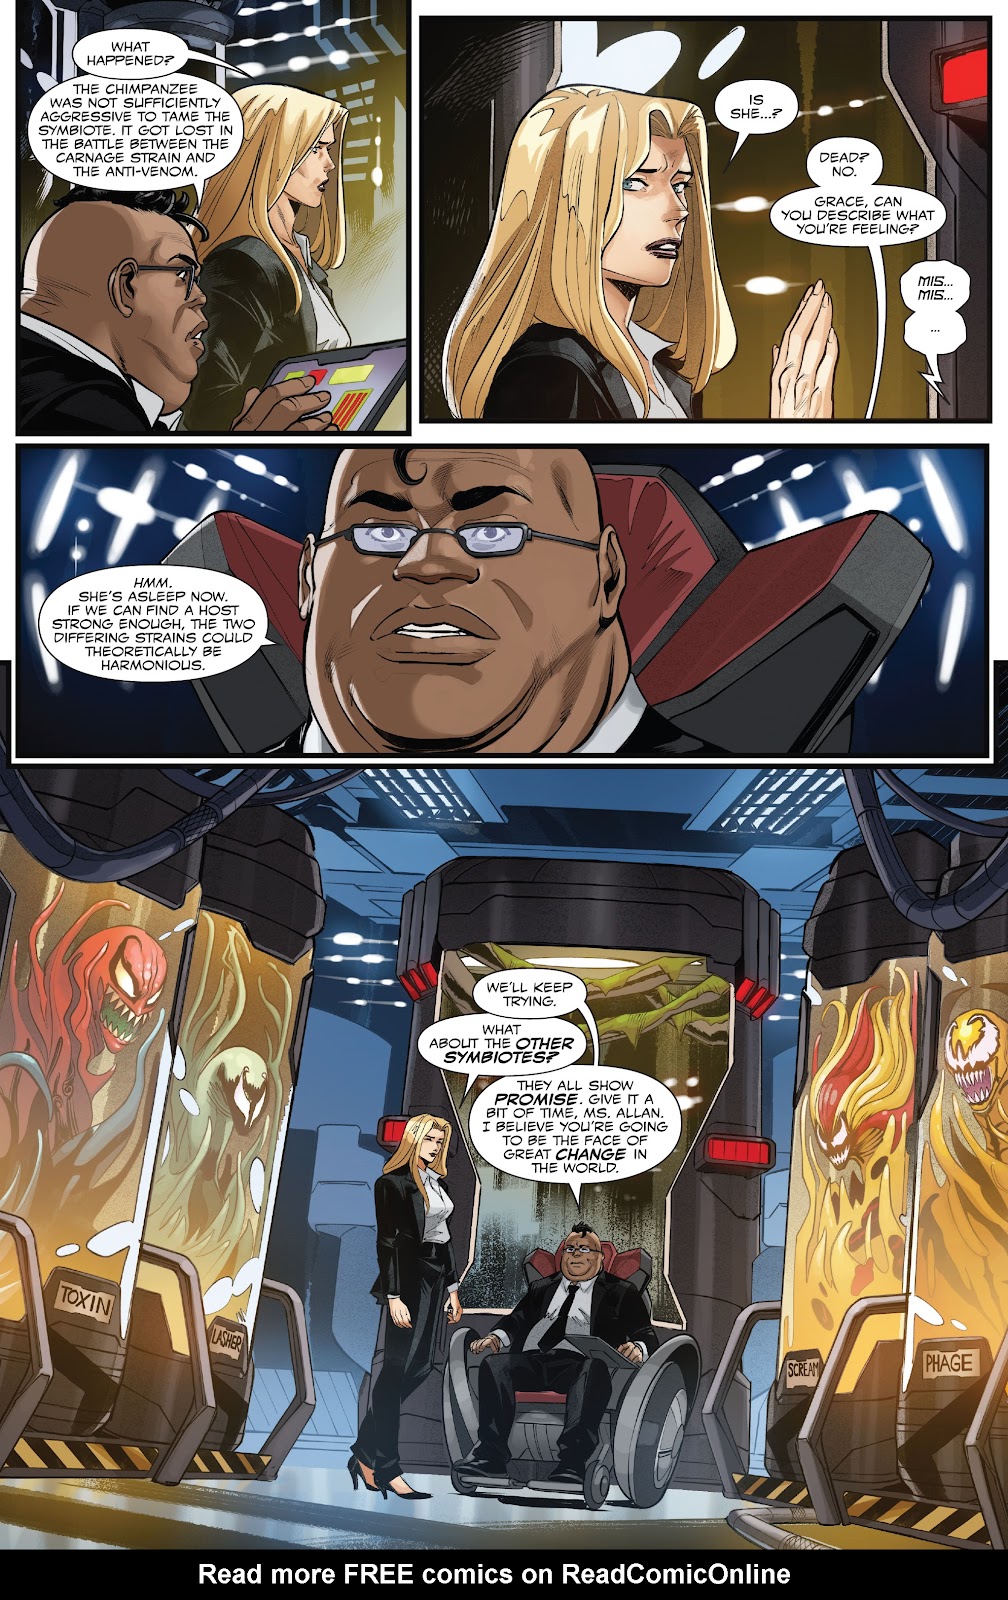 Cult of Carnage: Misery issue 1 - Page 15